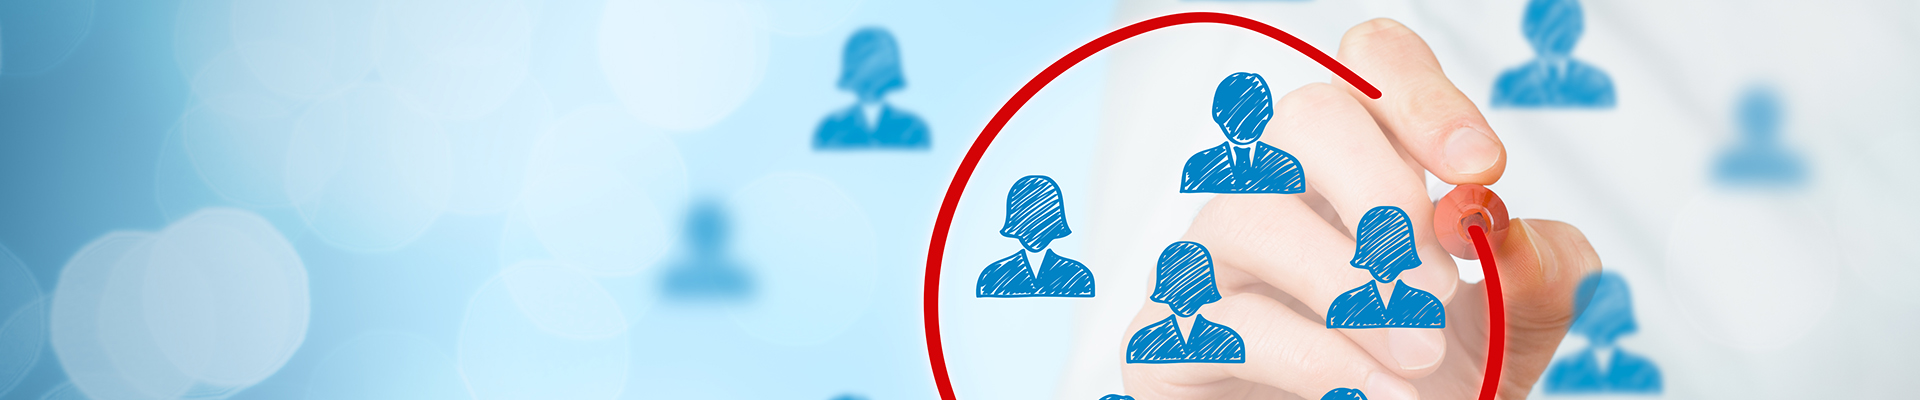 Header image of a person circling a group of user icons with a red pen to differentiate them from the rest